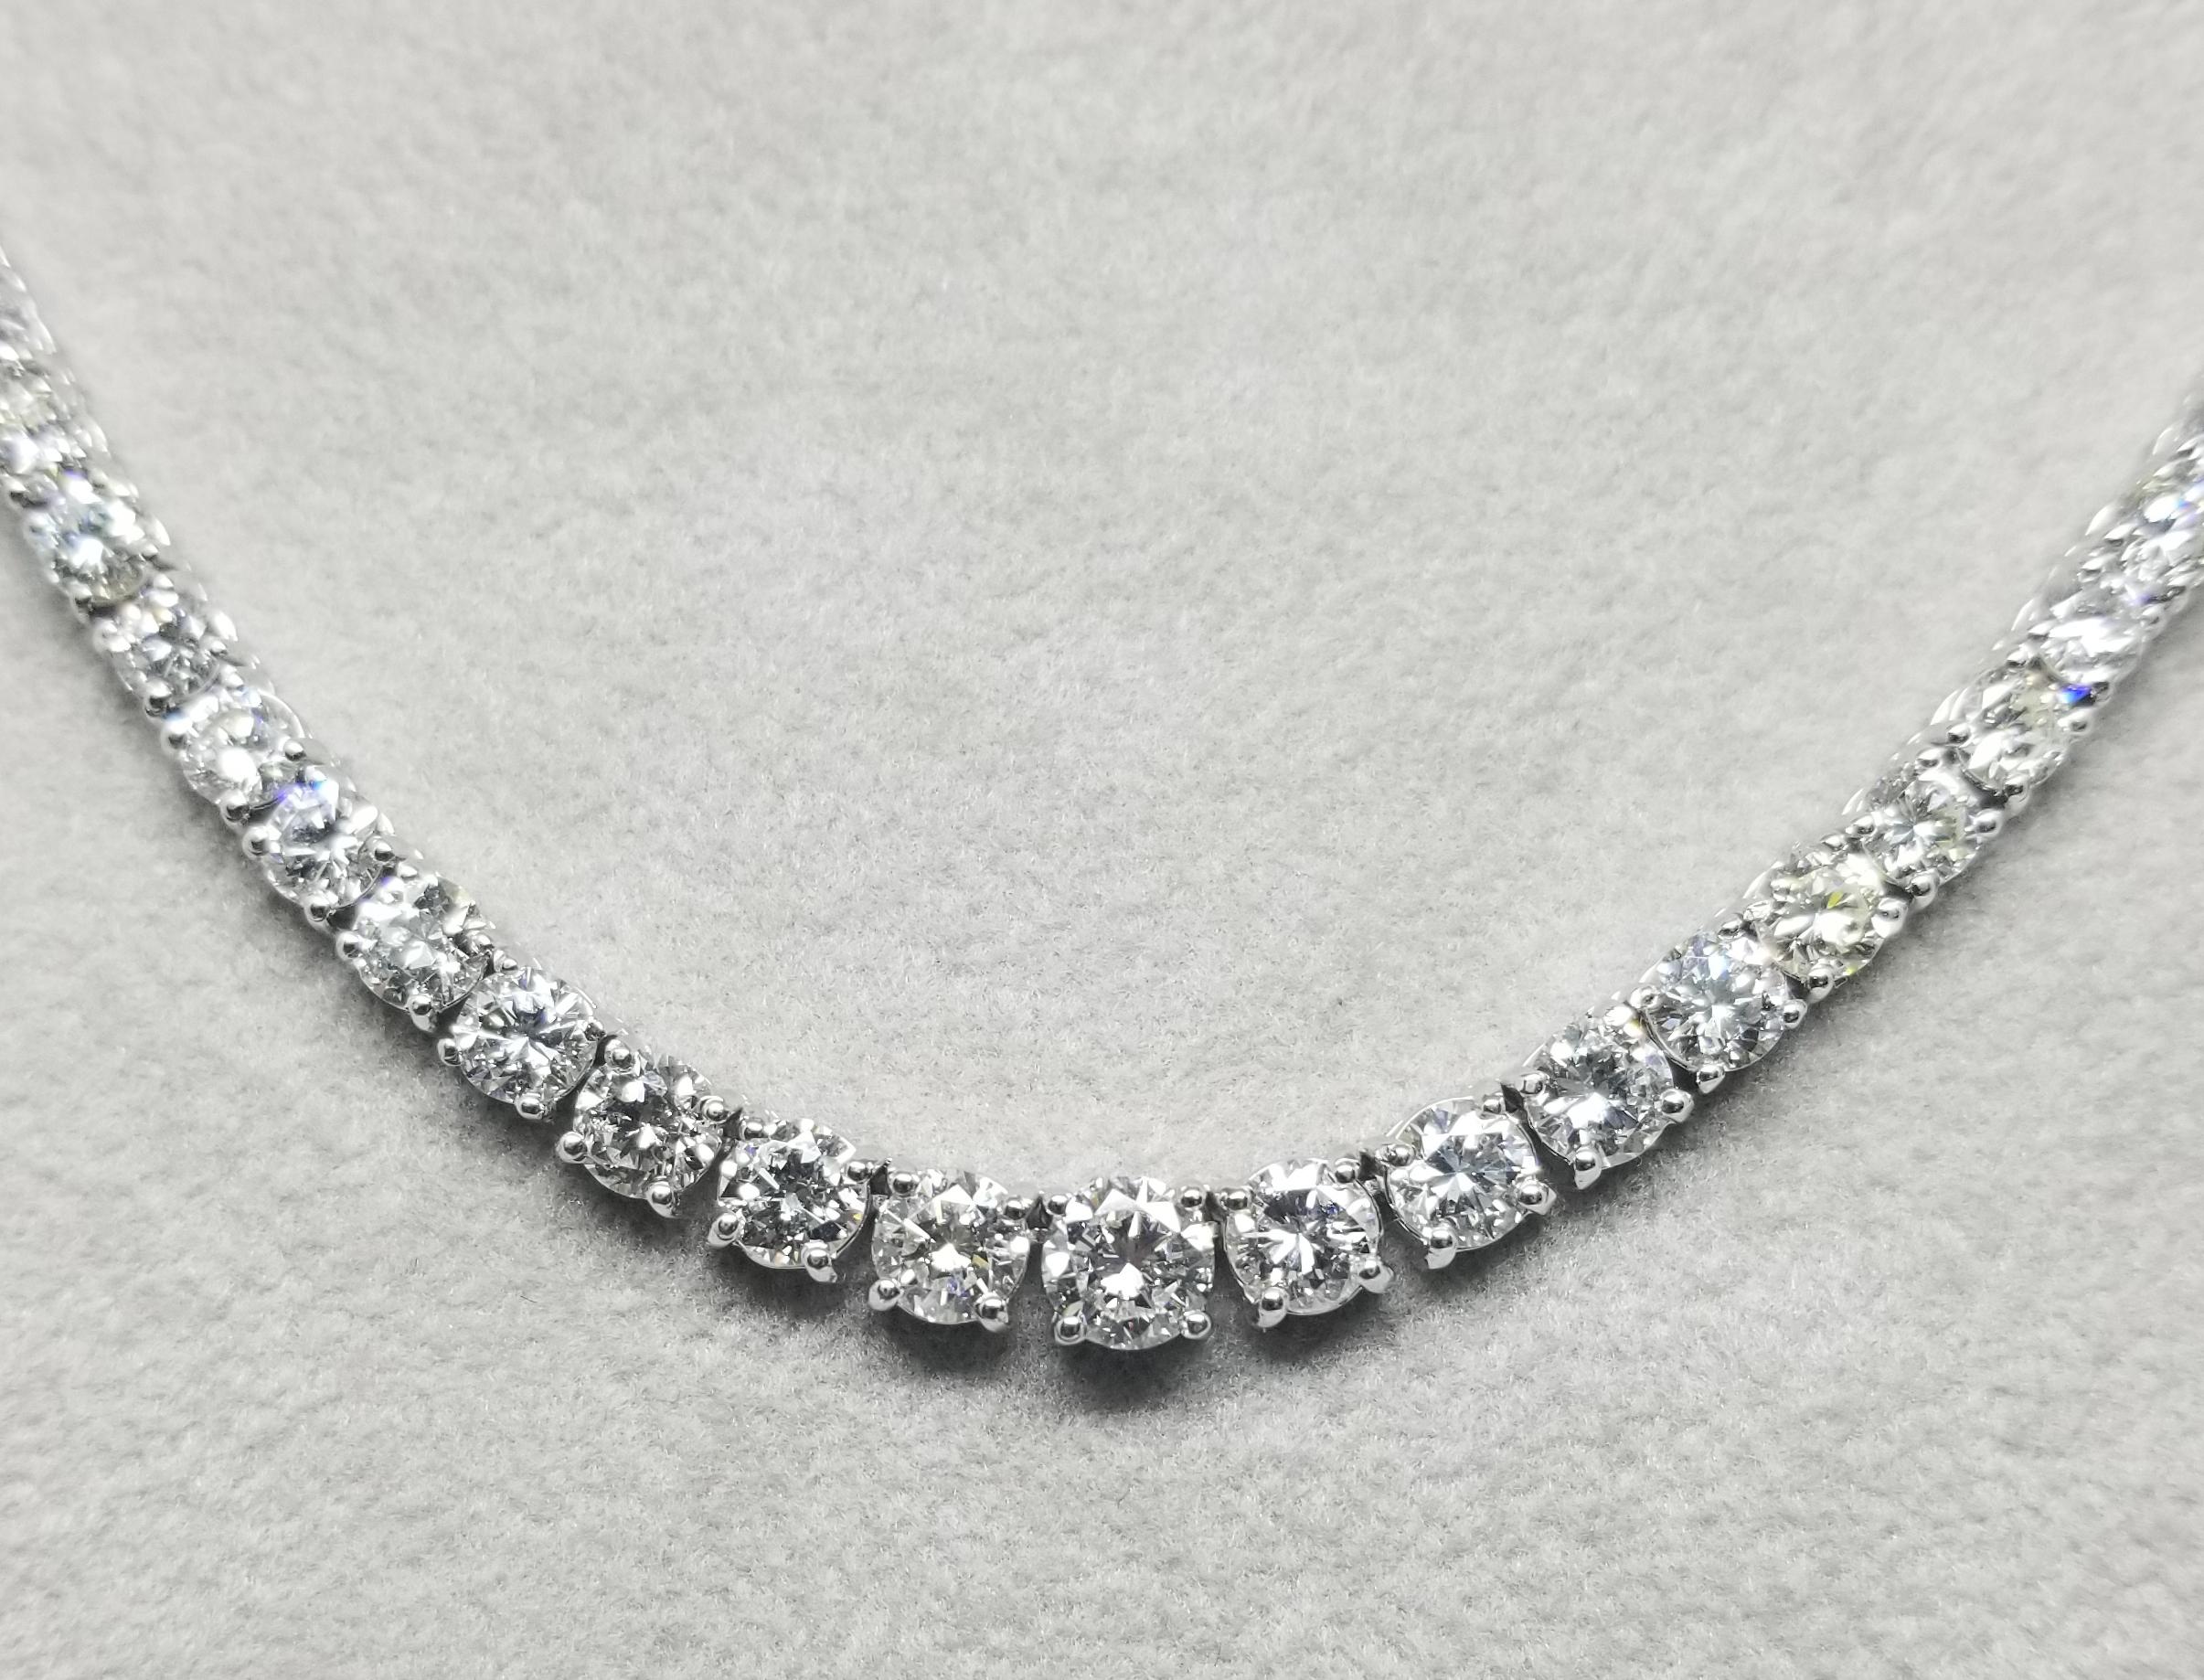 18k white gold graduated 4 prong diamond necklace, containing 
 Specifications:
    main stone: ROUND CUT DIAMONDS
    diamonds: 145 PIECES
    carat total weight: 13.48cts.
    center diamond:  4.9mm
    color: G
    clarity: VS2
    brand: custom
